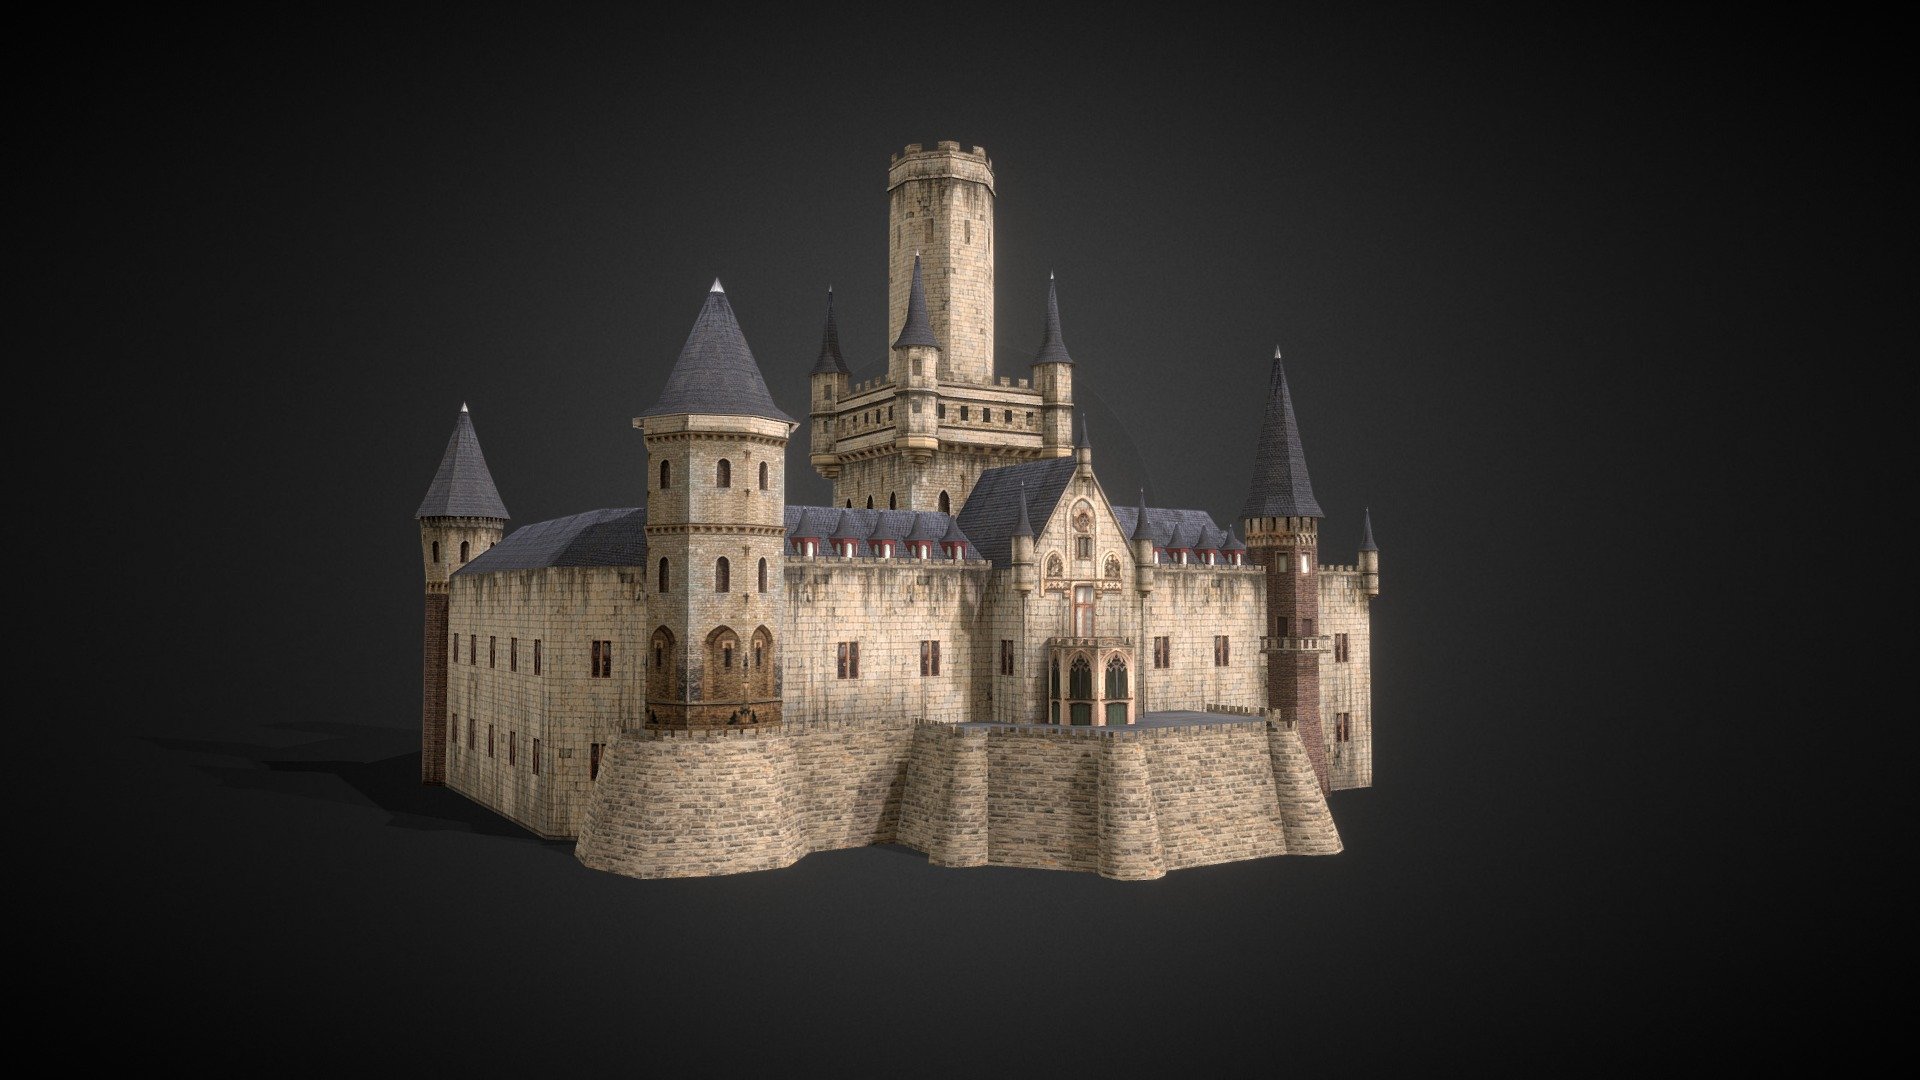 Marienburg Castle is a Gothic revival castle located in Lower Saxony, Germany.
I made it in Autodesk Maya it's a low poly game ready 3d model suitable for Unreal Engine &amp; Unity.

Please leave a comment and share your views on my work,

Thanks 3d model